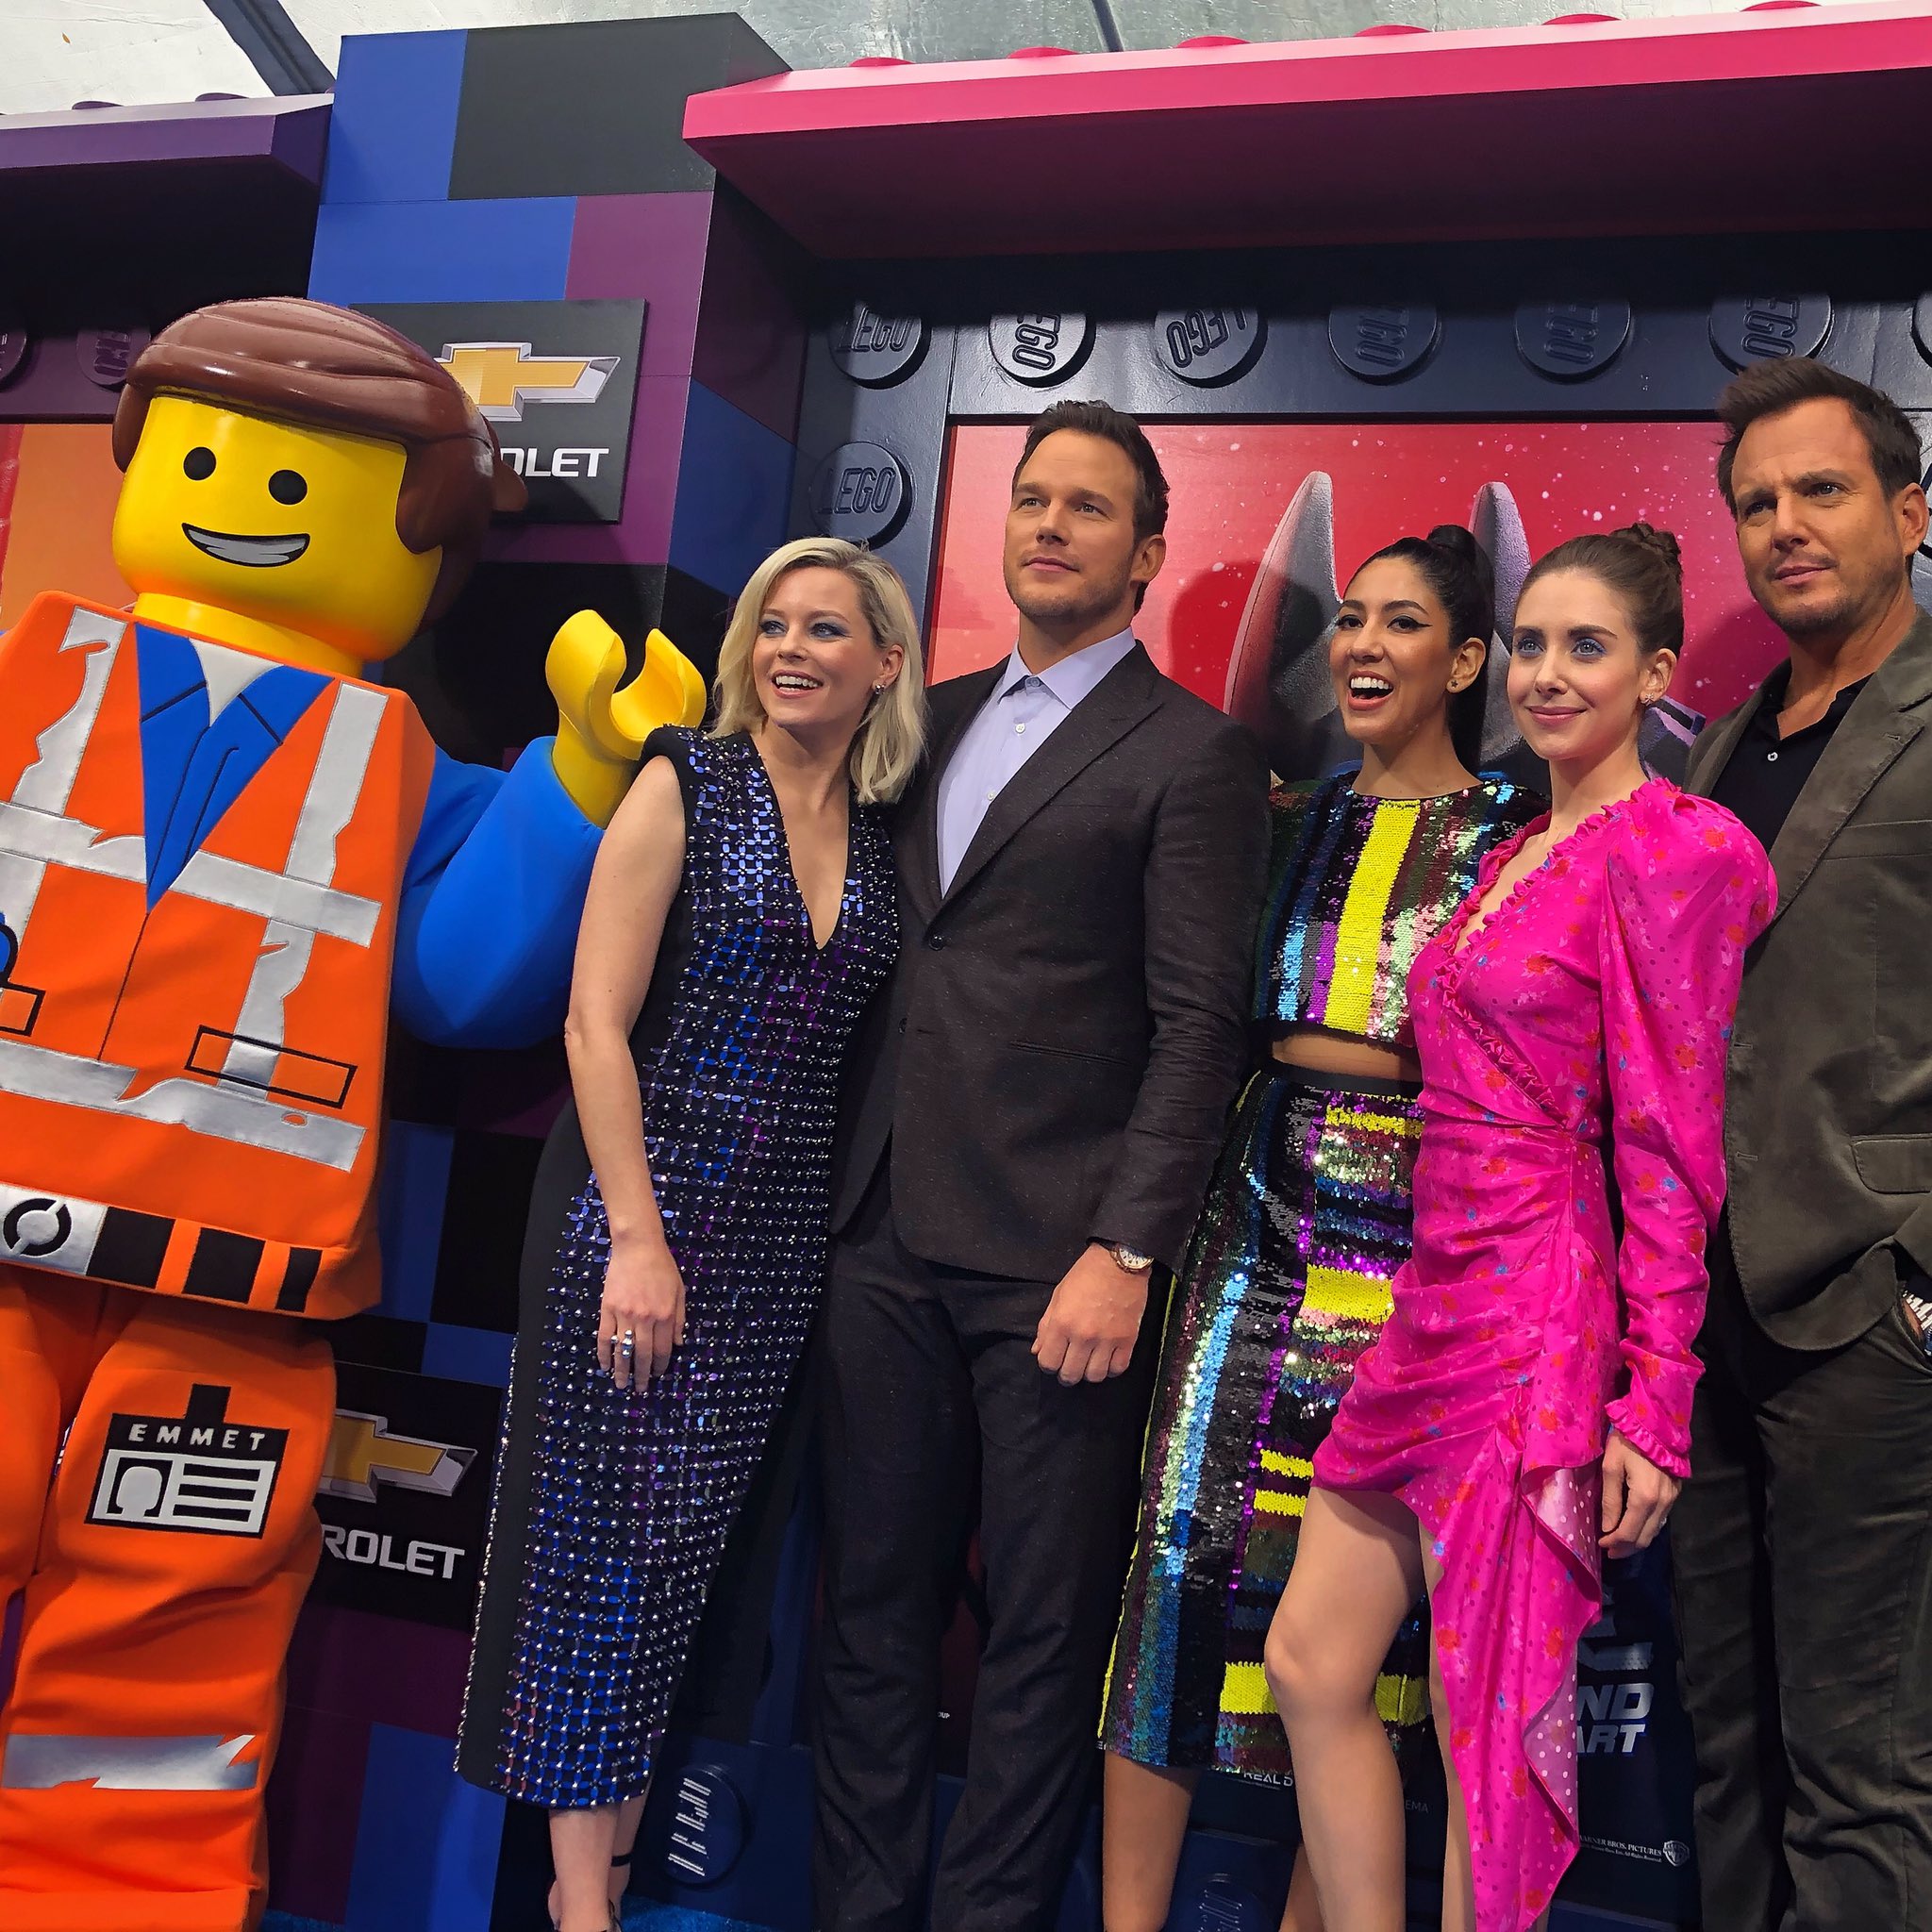 I detaljer Opgive passe The LEGO Movie 2 on Twitter: "They come in pieces. That's a wrap on the  world premiere of #TheLEGOMovie2! See it in theaters everywhere February 8.  https://t.co/2tBrhYbwjx" / Twitter